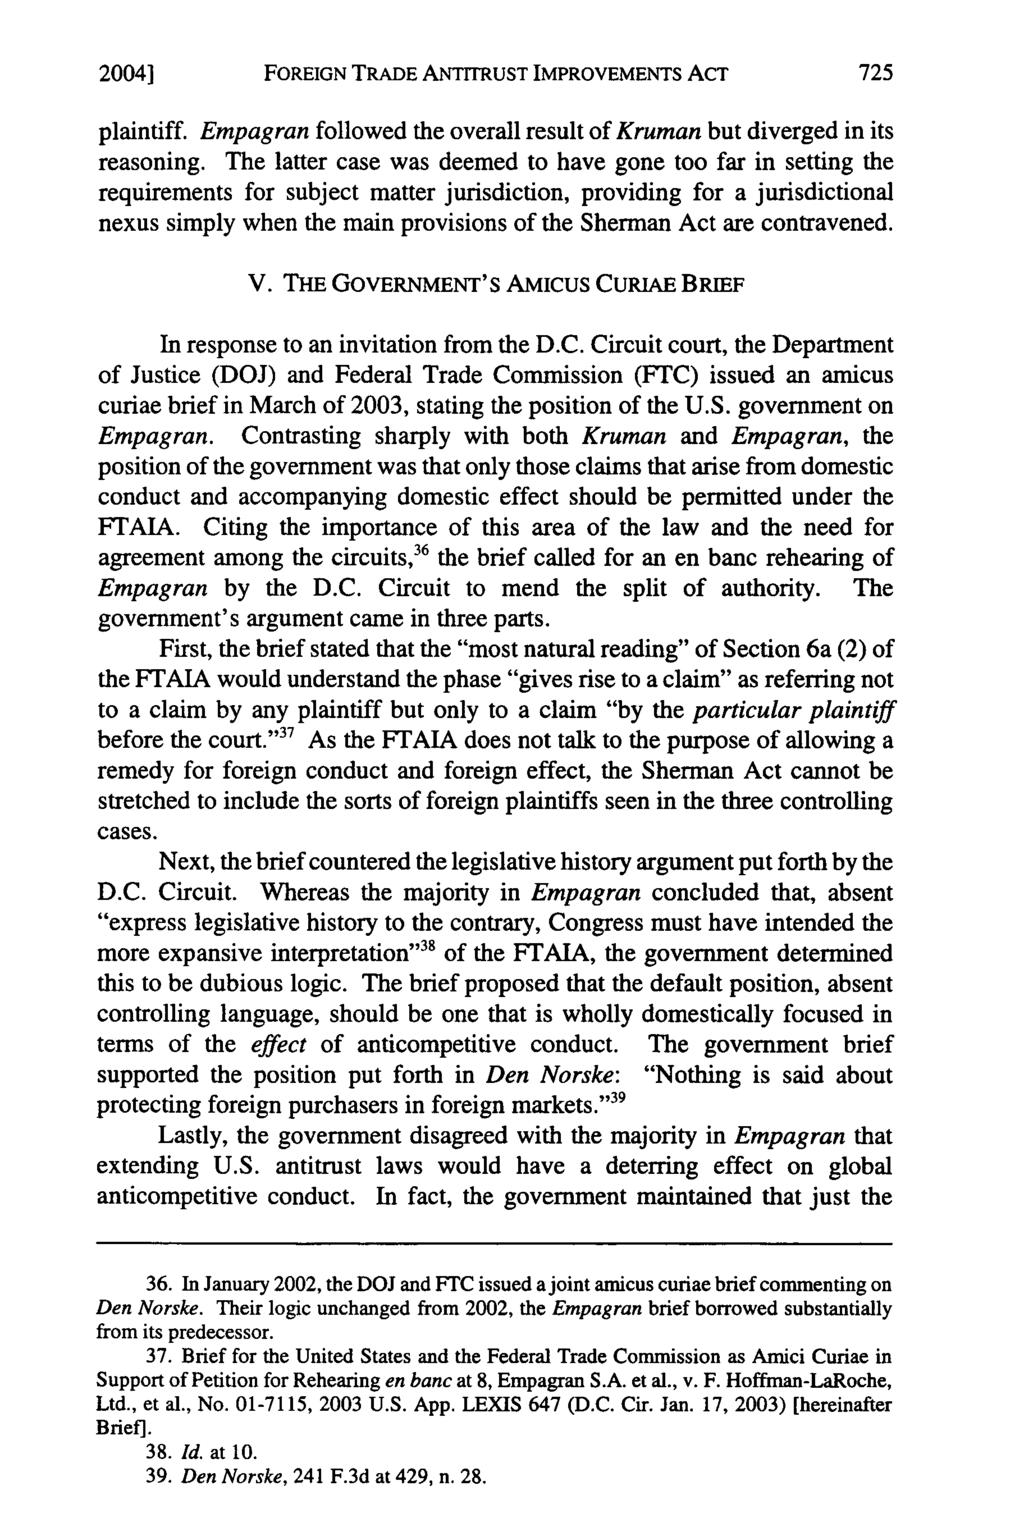 2004] FOREIGN TRADE ANTITRUST IMPROVEMENTS ACT plaintiff. Empagran followed the overall result of Kruman but diverged in its reasoning.